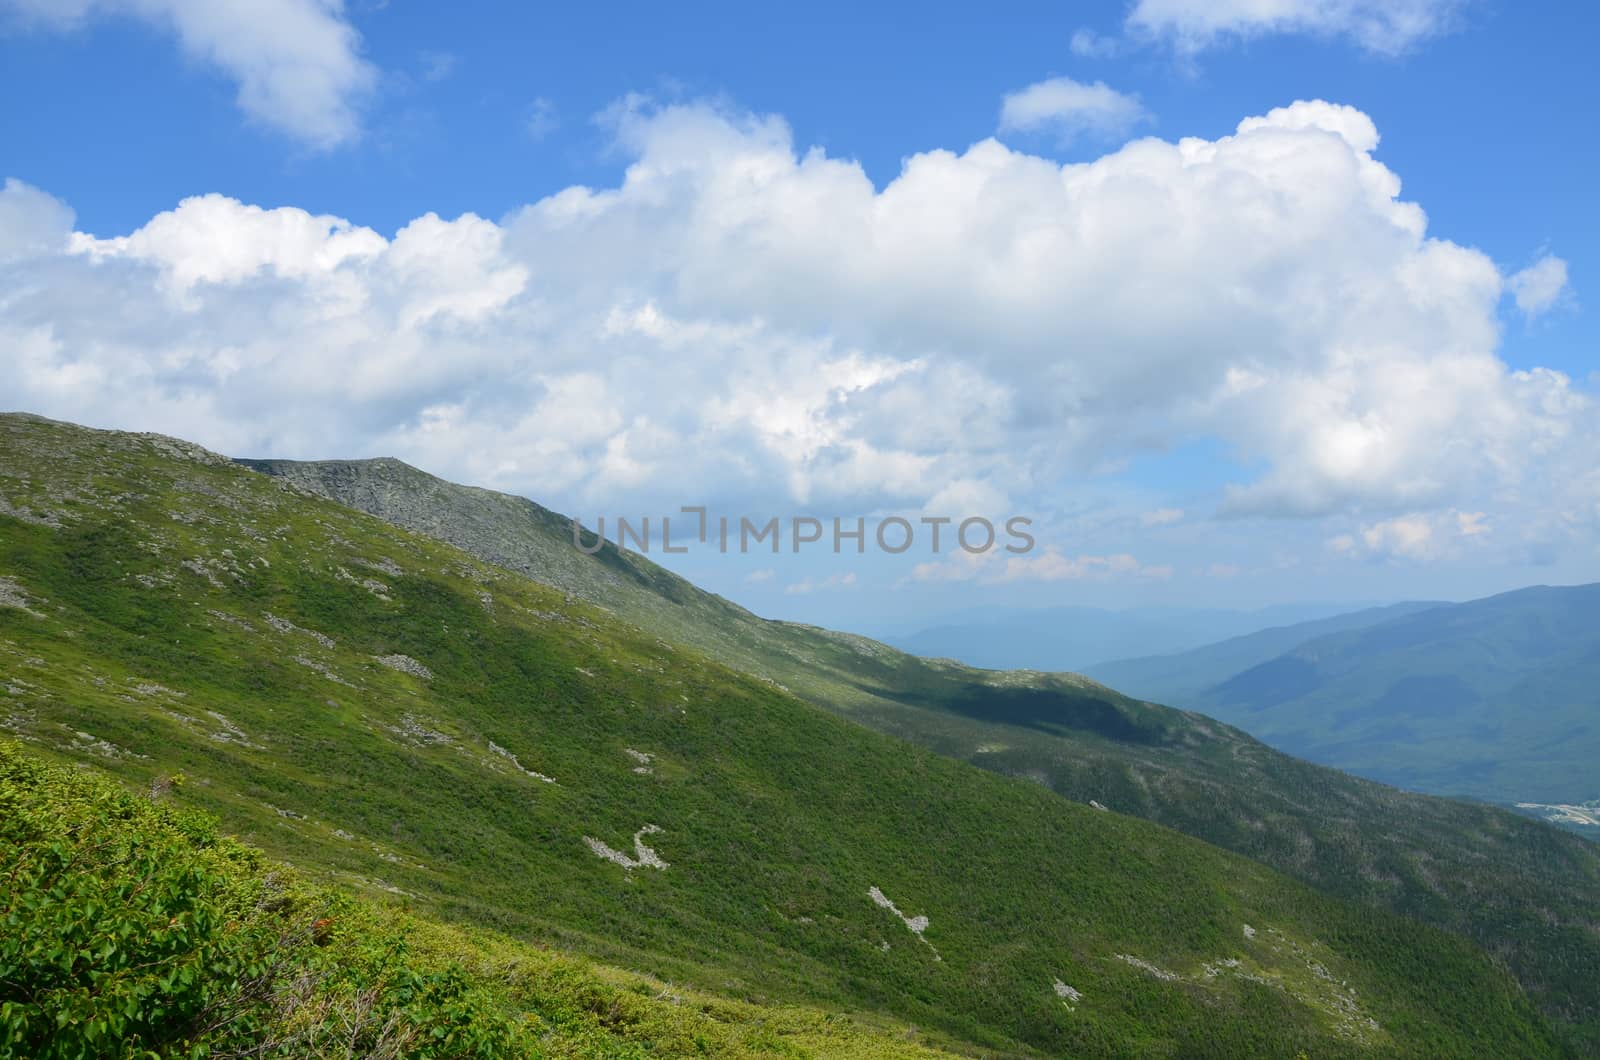 View along the trail to Mt. Washington in New Hampshire